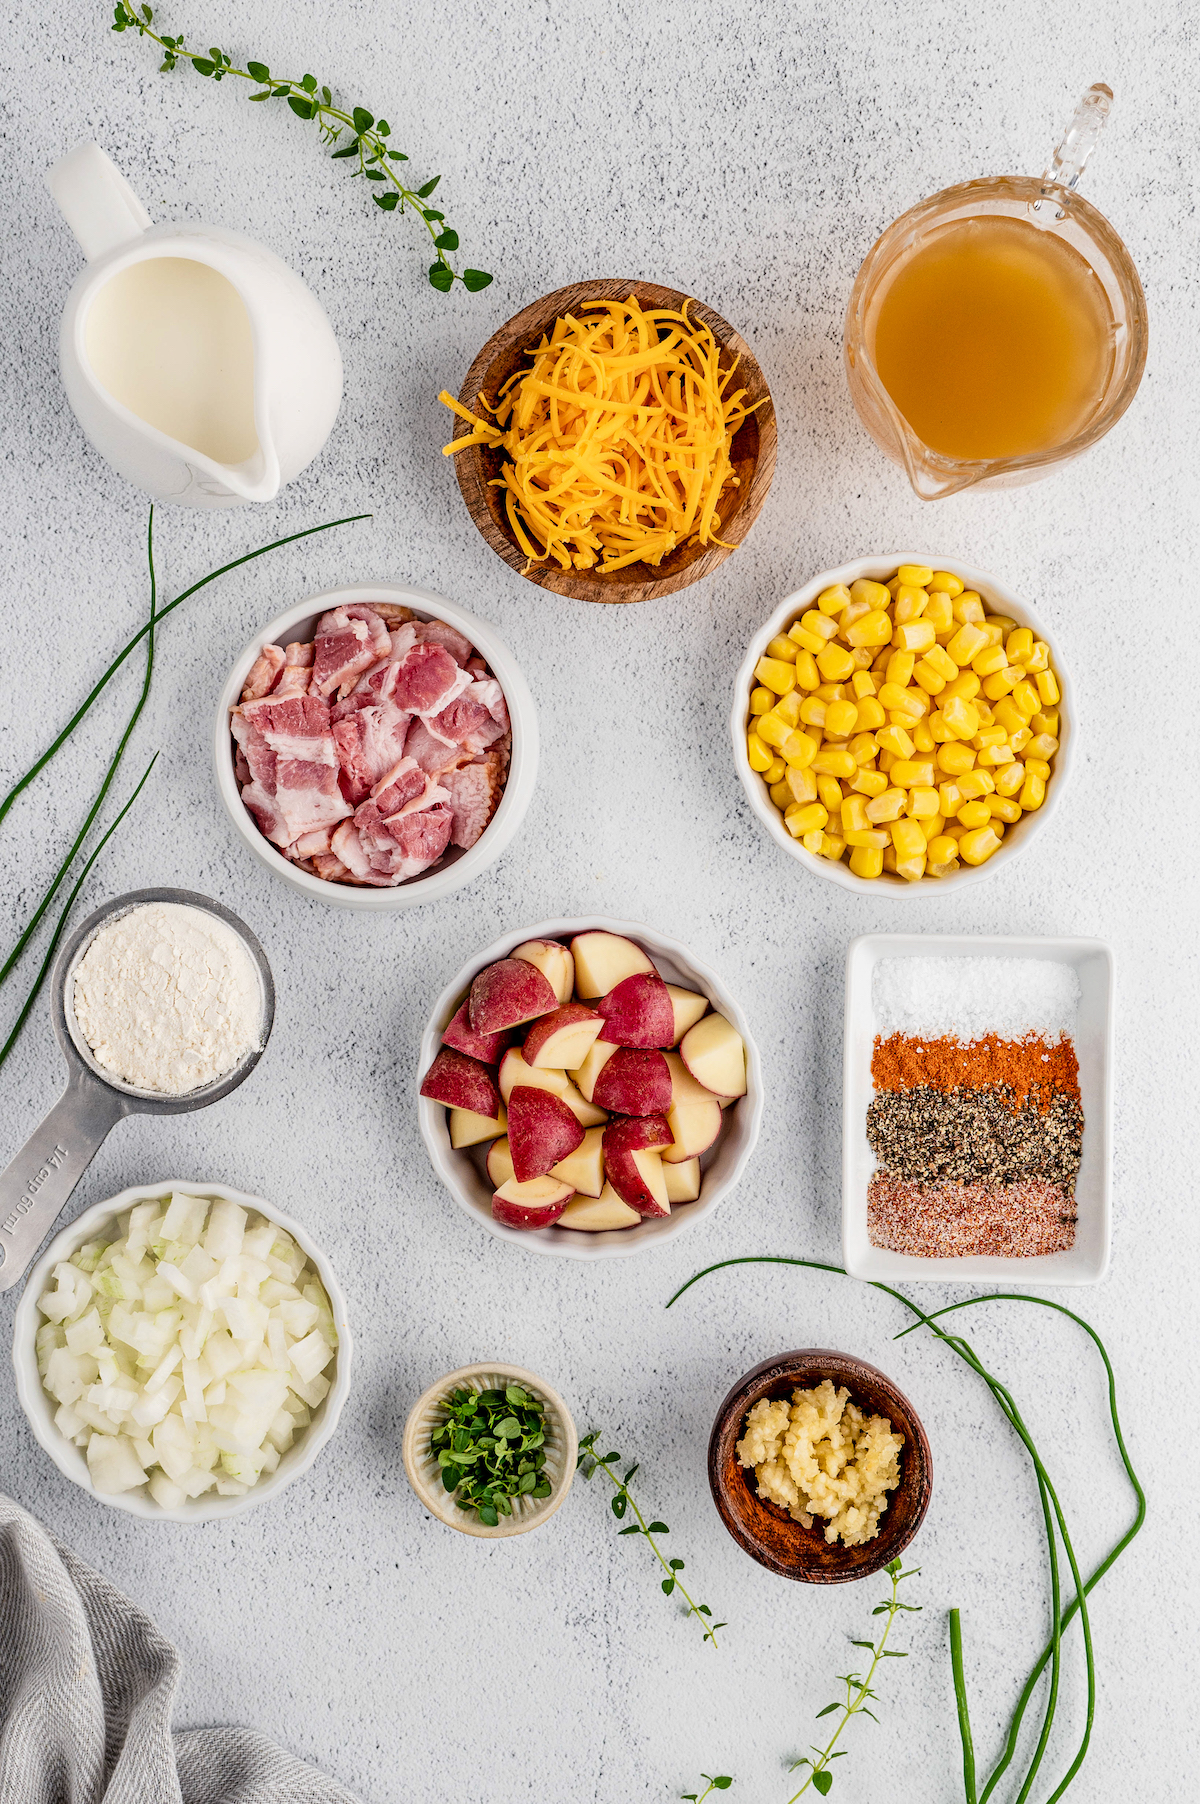 Ingredients for the bacon corn chowder.